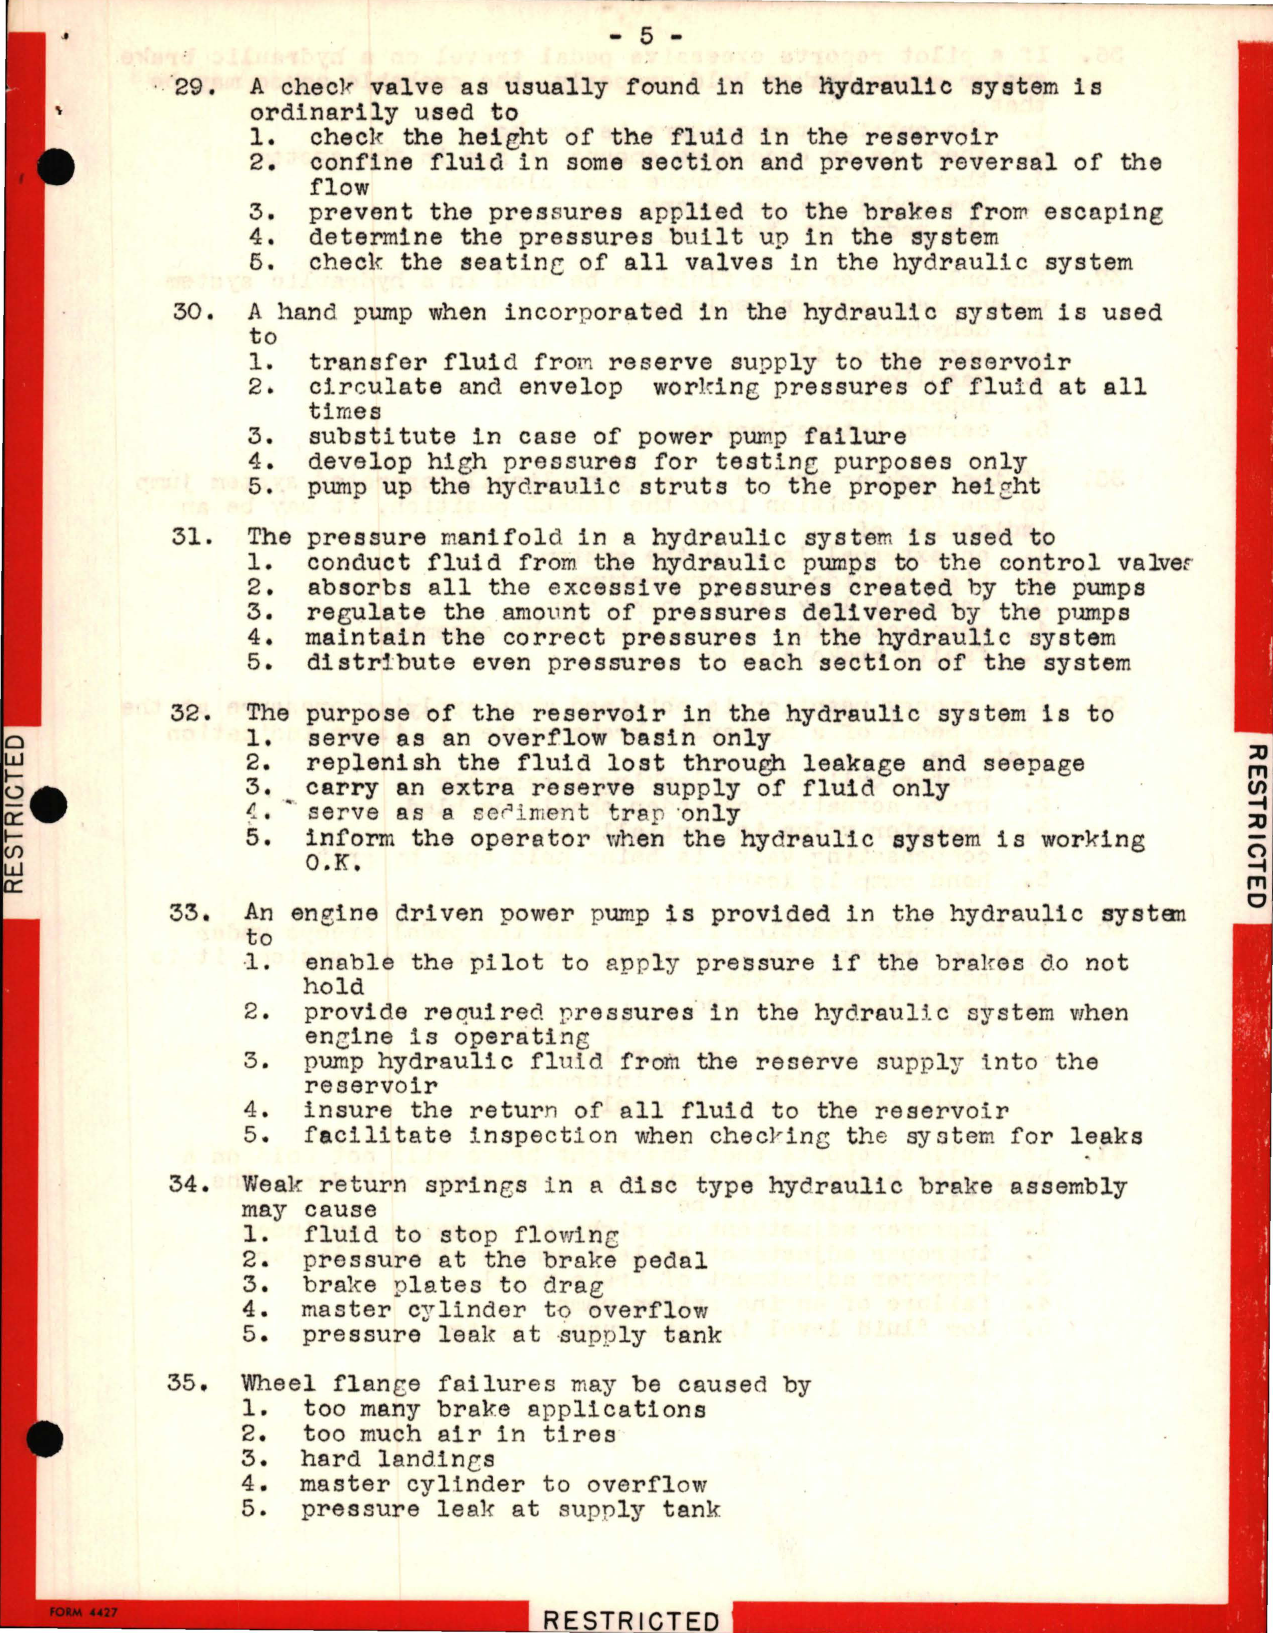 Sample page 5 from AirCorps Library document: Instructor Training Questions for Hydraulic Systems - Lockheed-Vega Service School